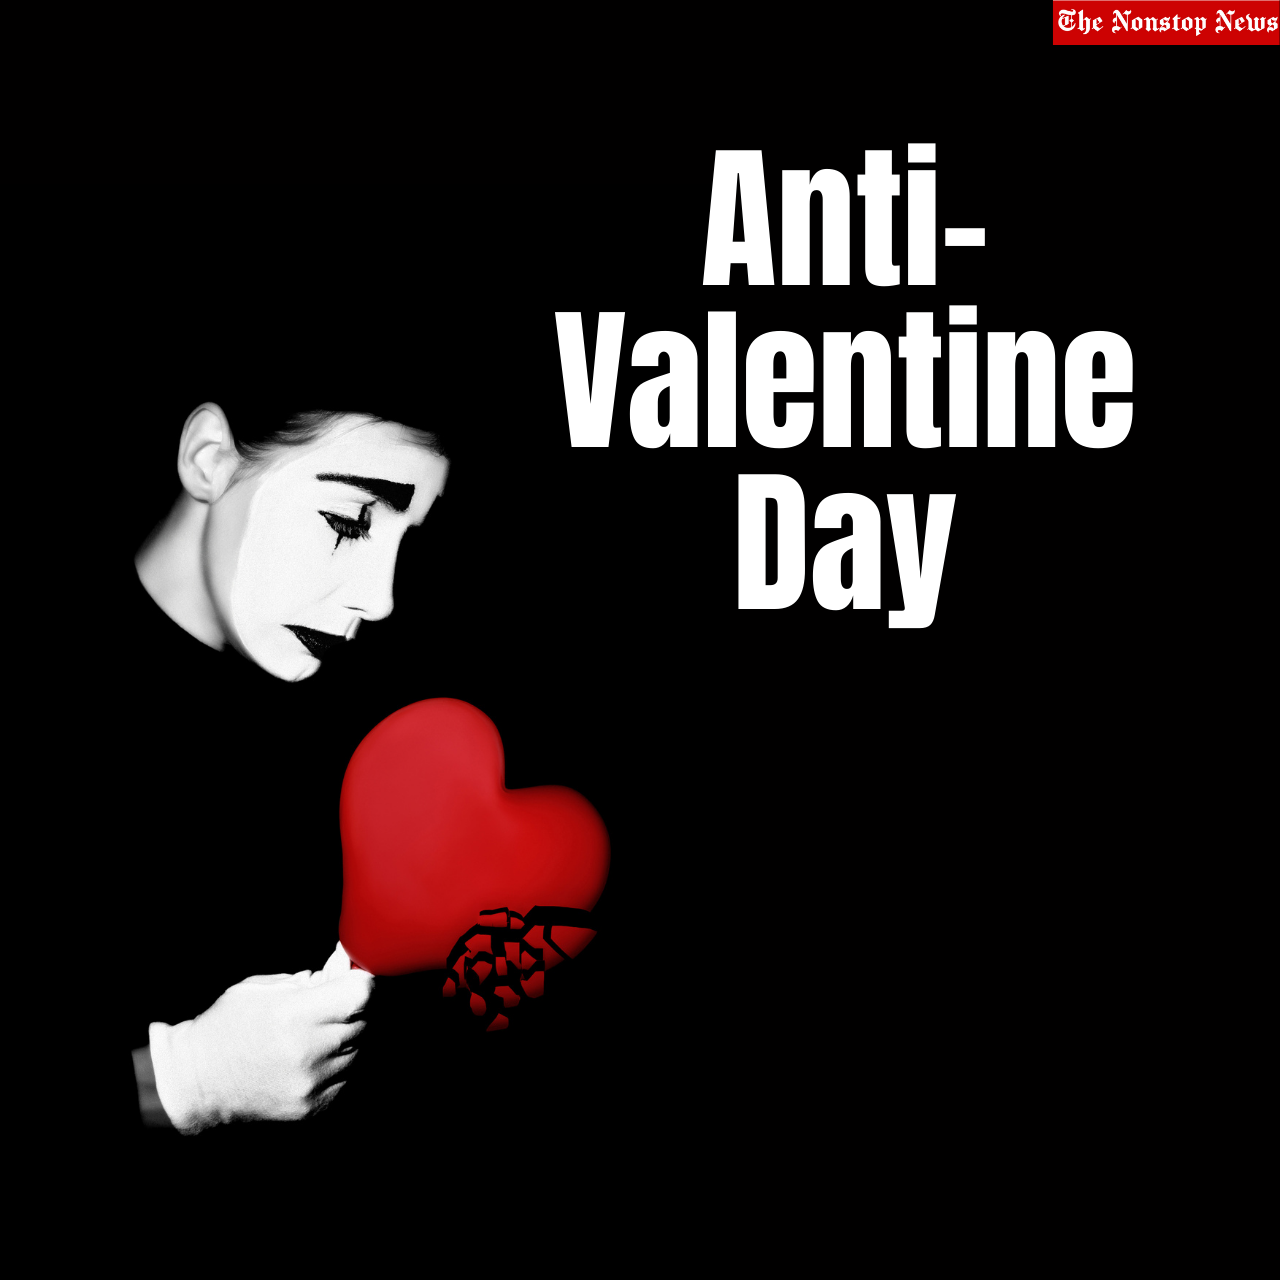 Anti-Valentine Day 2022 Wishes, Quotes, Messages, HD Images, Greetings, Instagram Captions to Share